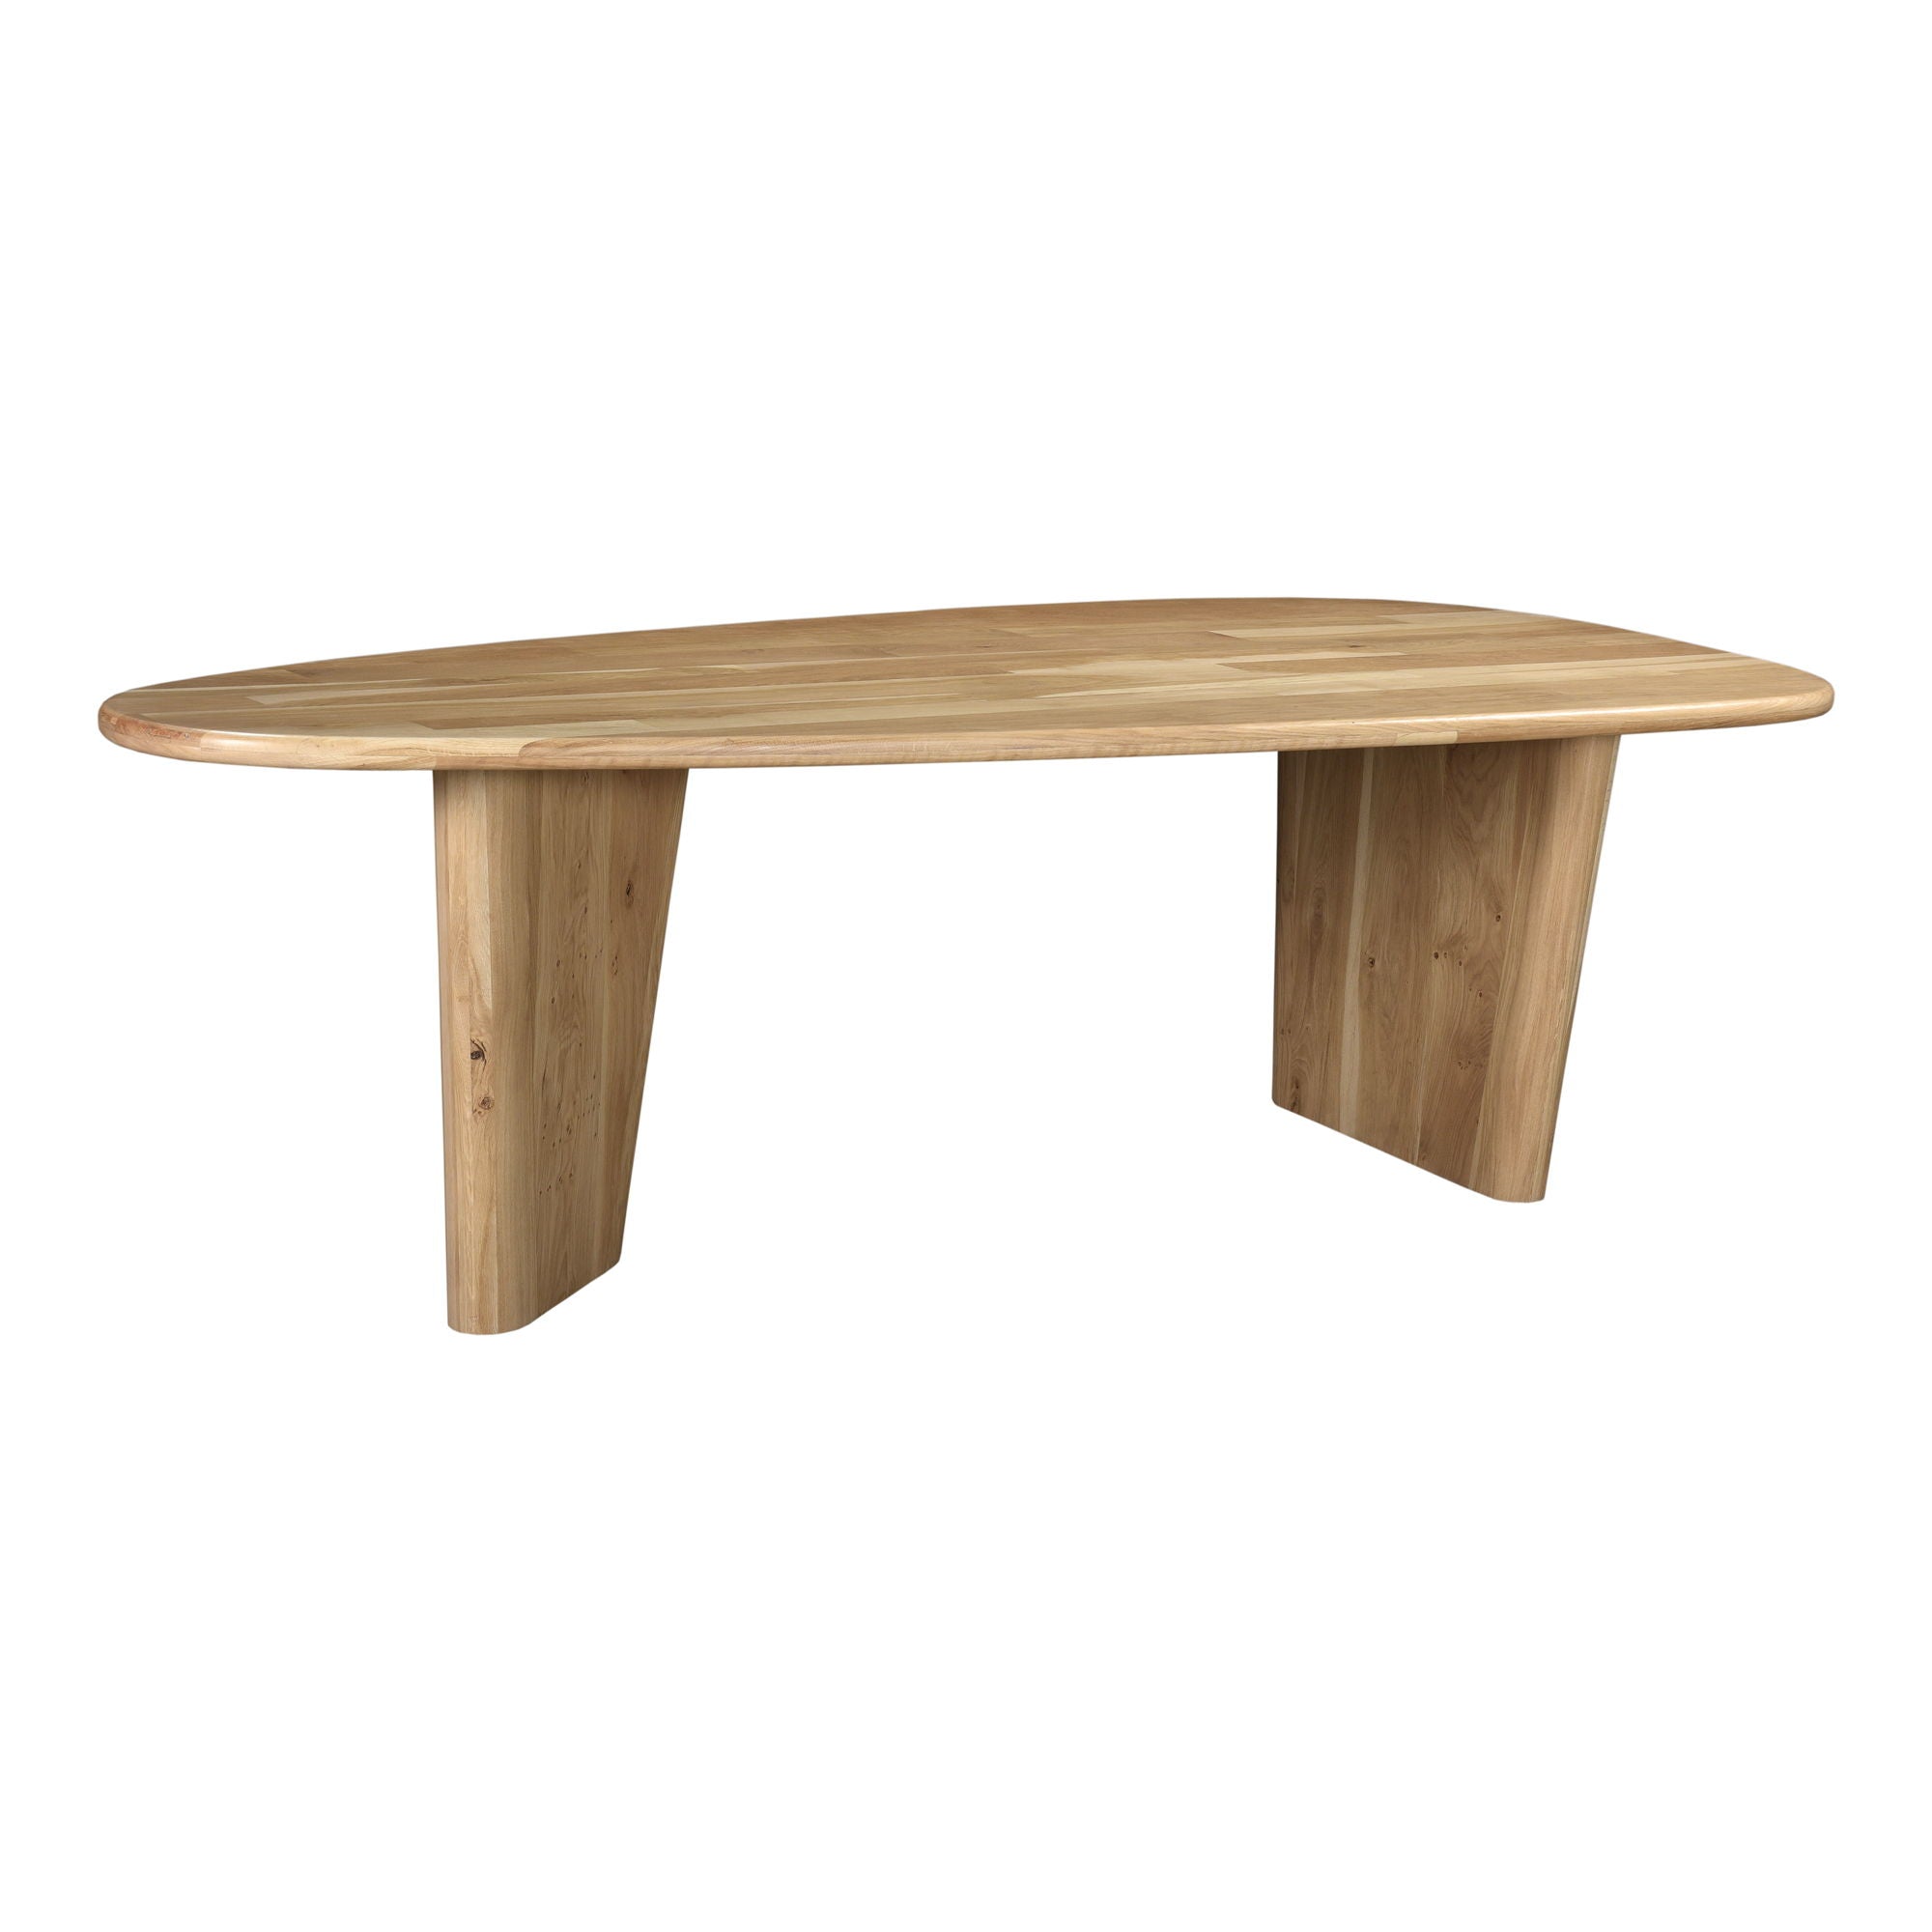 Appro - Dining Table - Natural